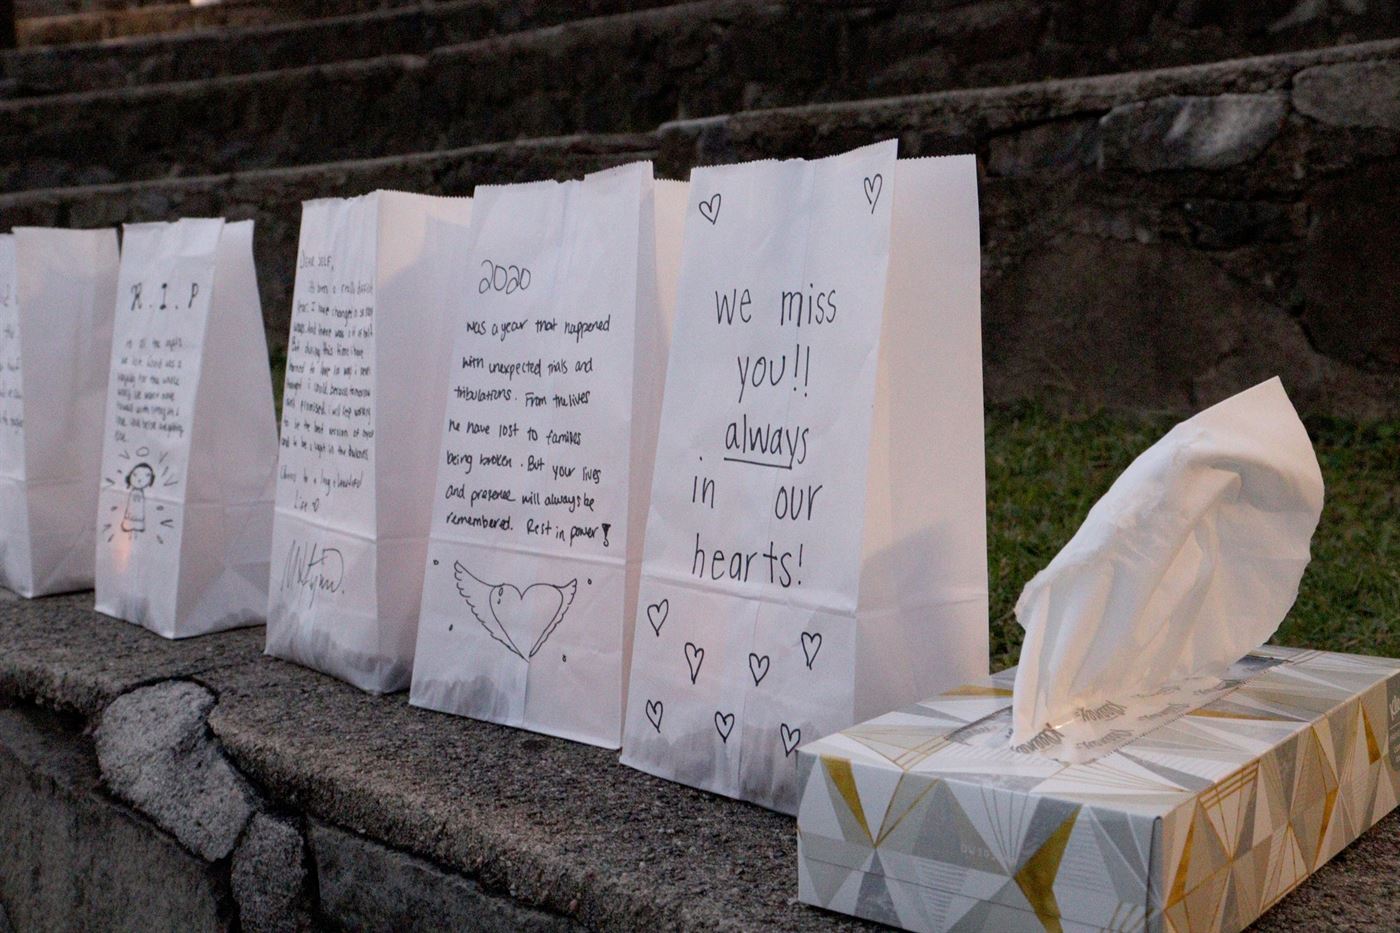 Tissues were provided all across the event, scattered next to heartfelt bags. John LaRosa | The Montclarion.